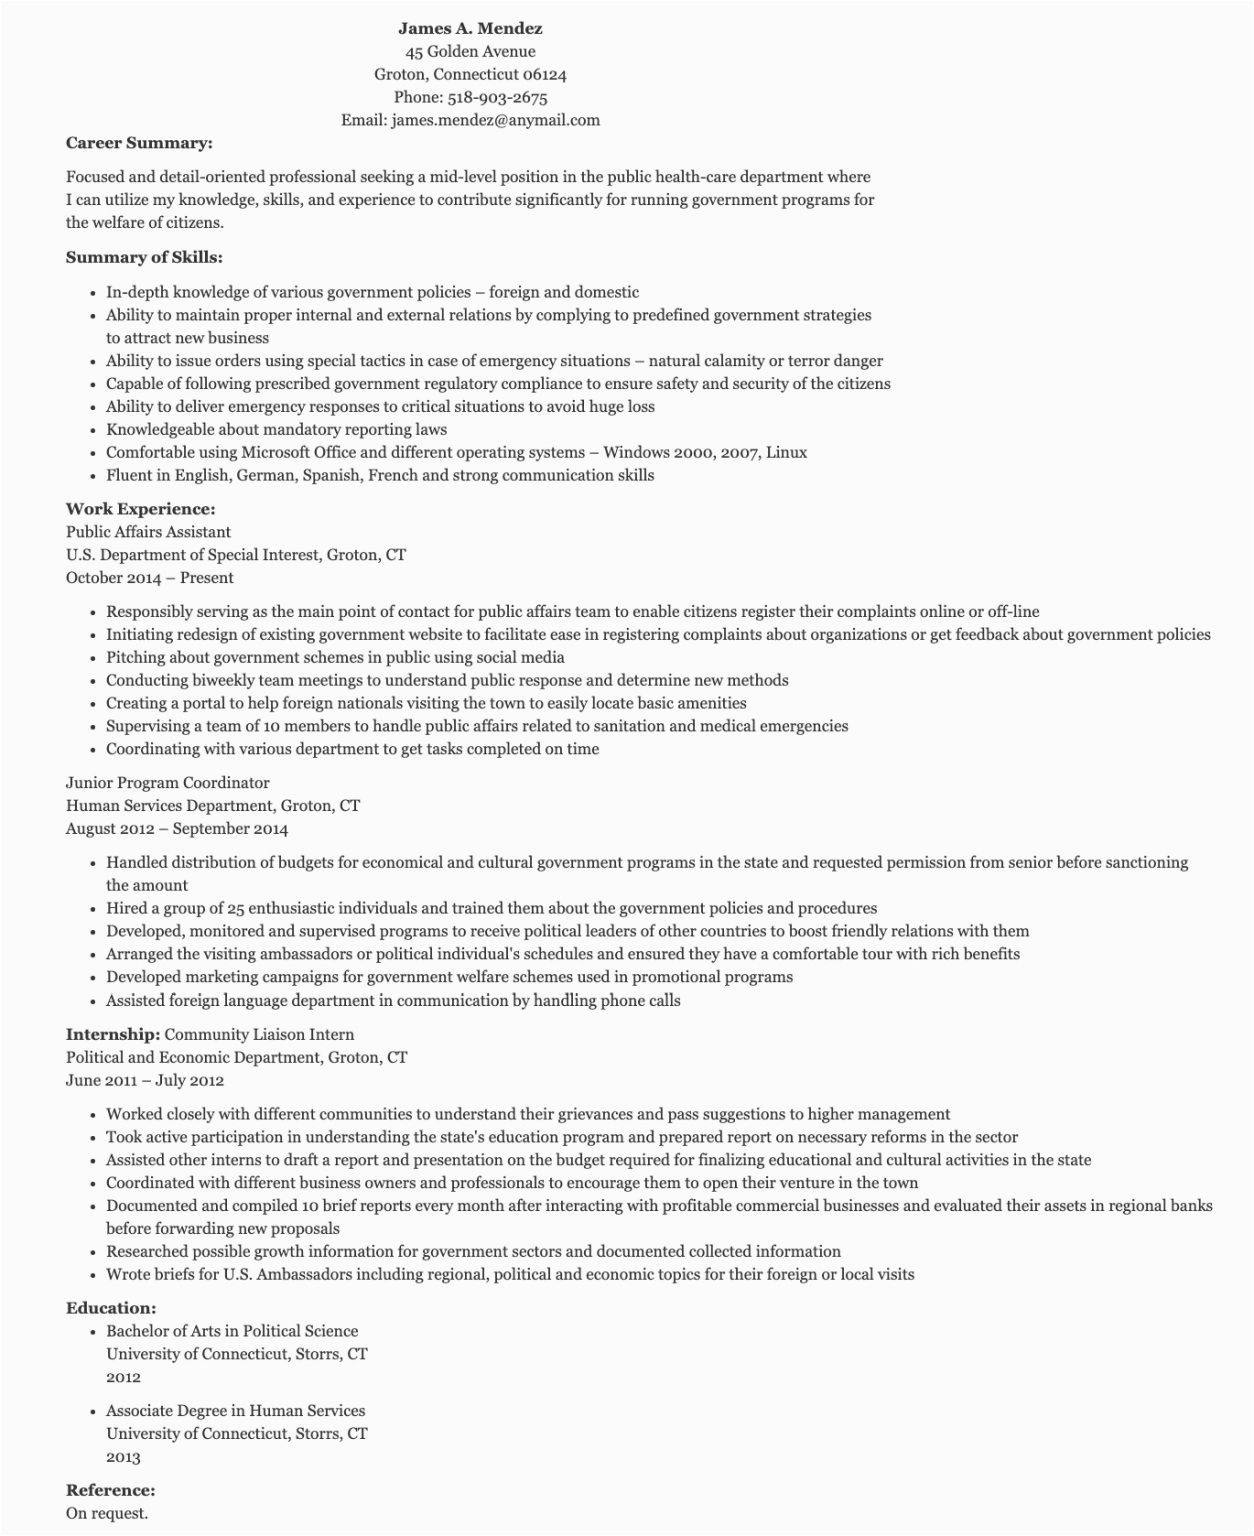 Sample Of Resume for Government Positions 2023 Resume Samples for Government Job Application In the Philippines